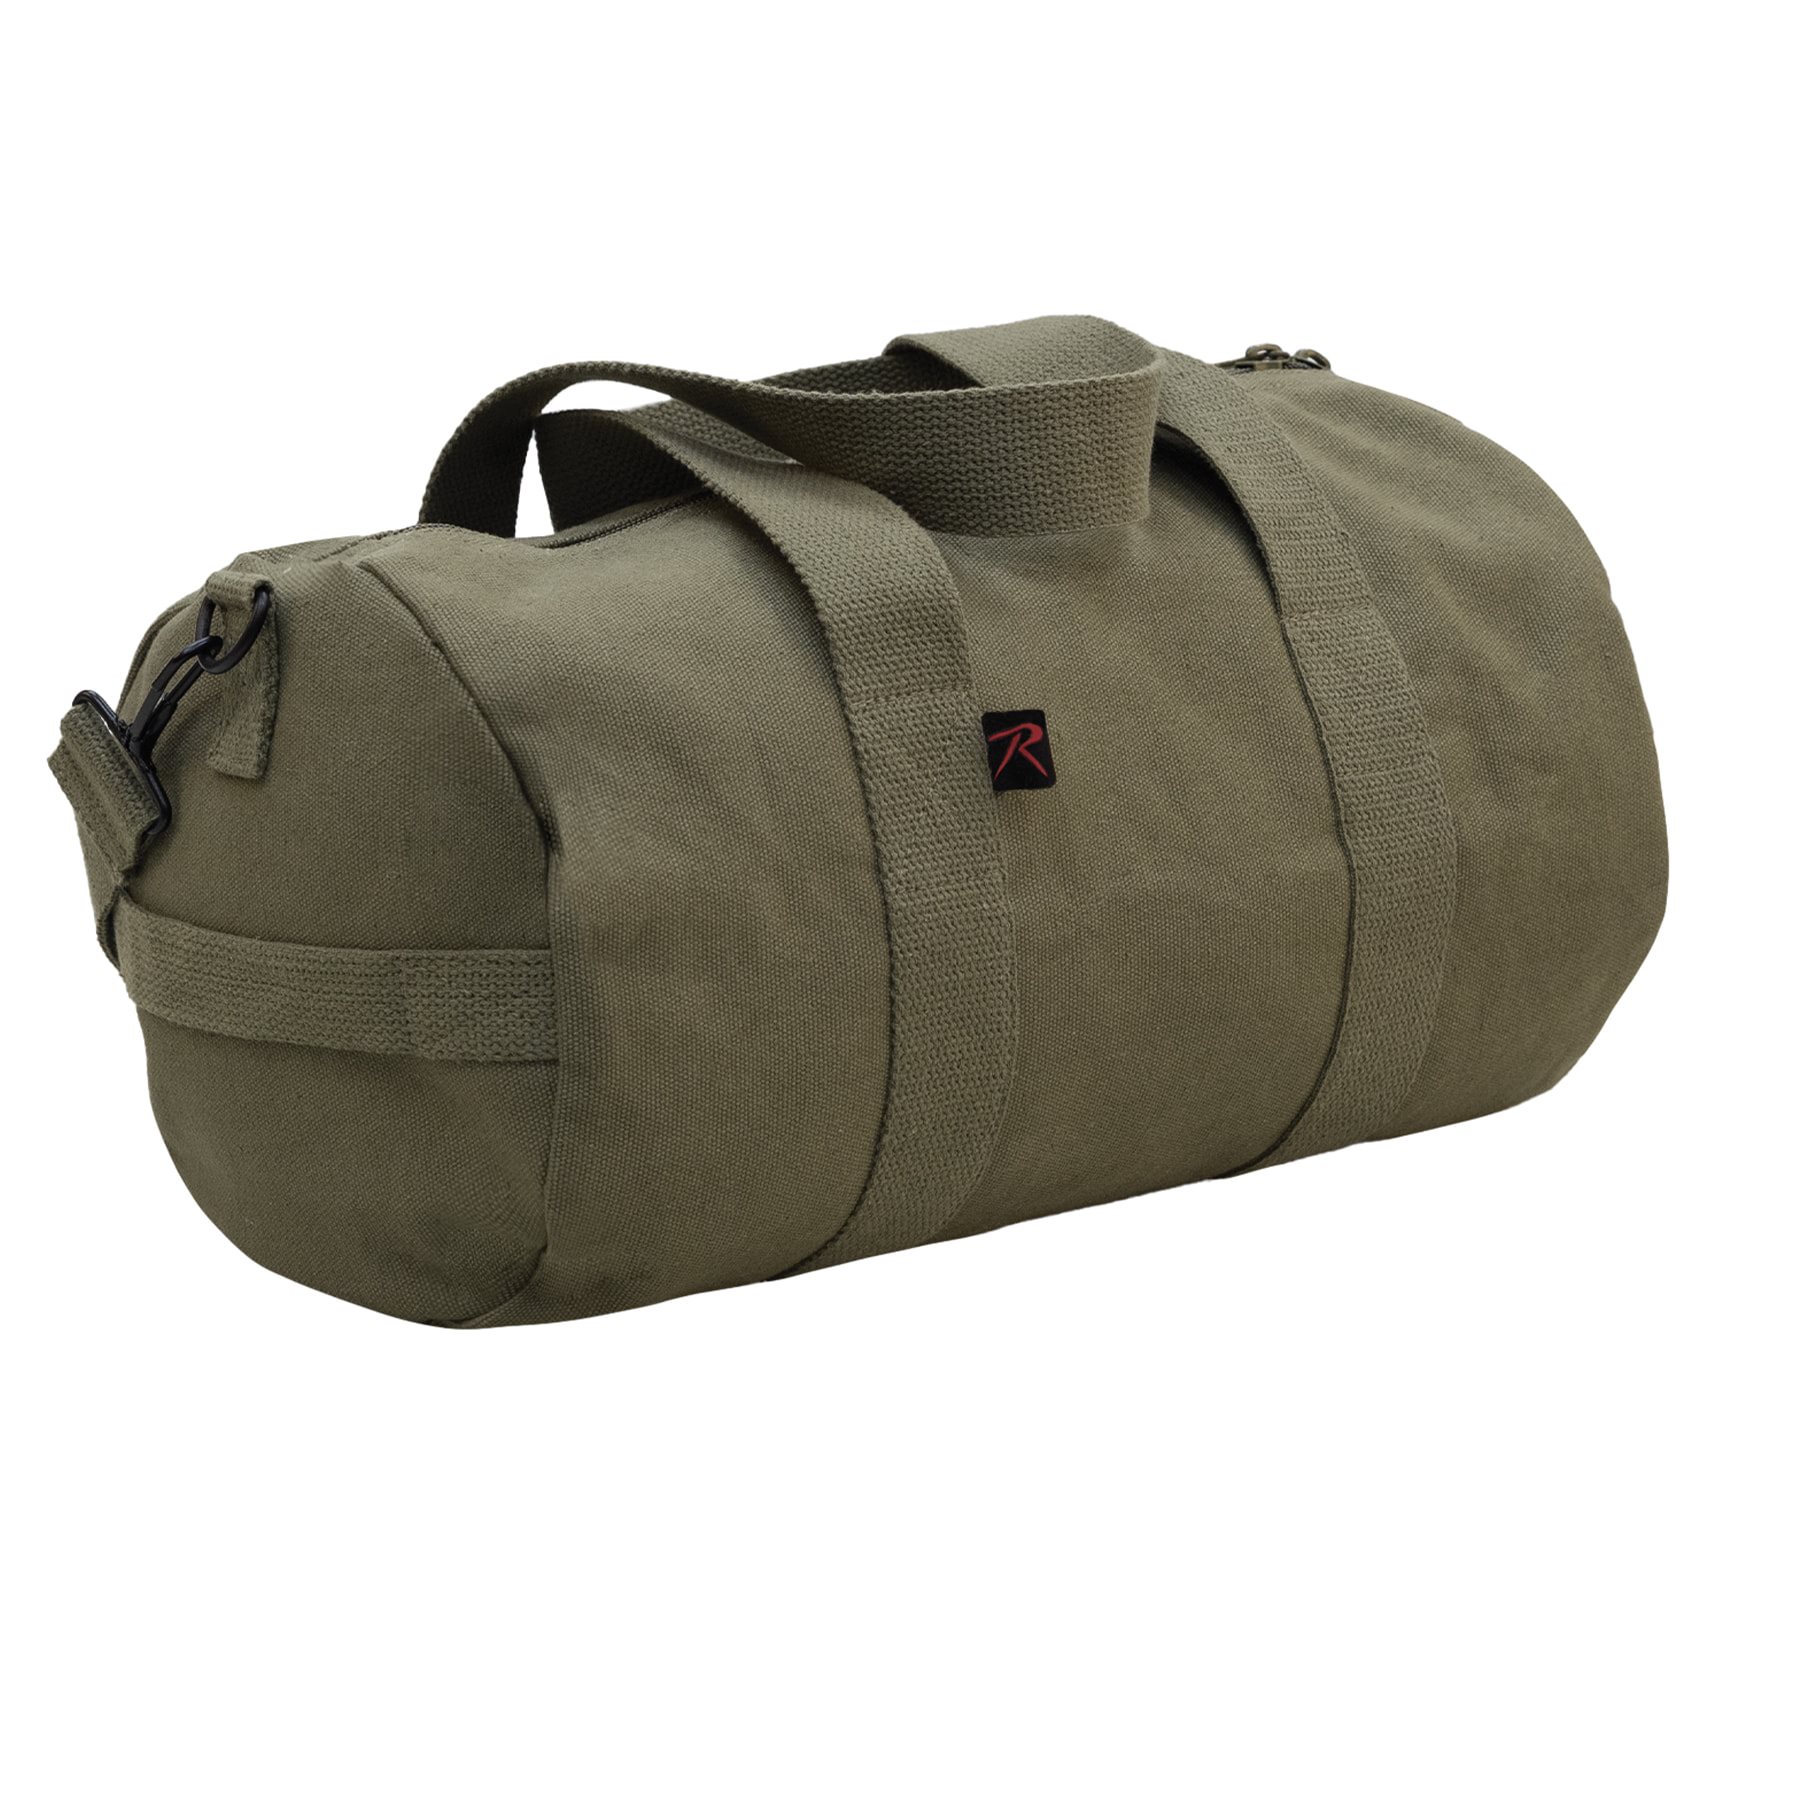 Shop Waxed Canvas Travel Bags- Fatigues Army Navy Gear